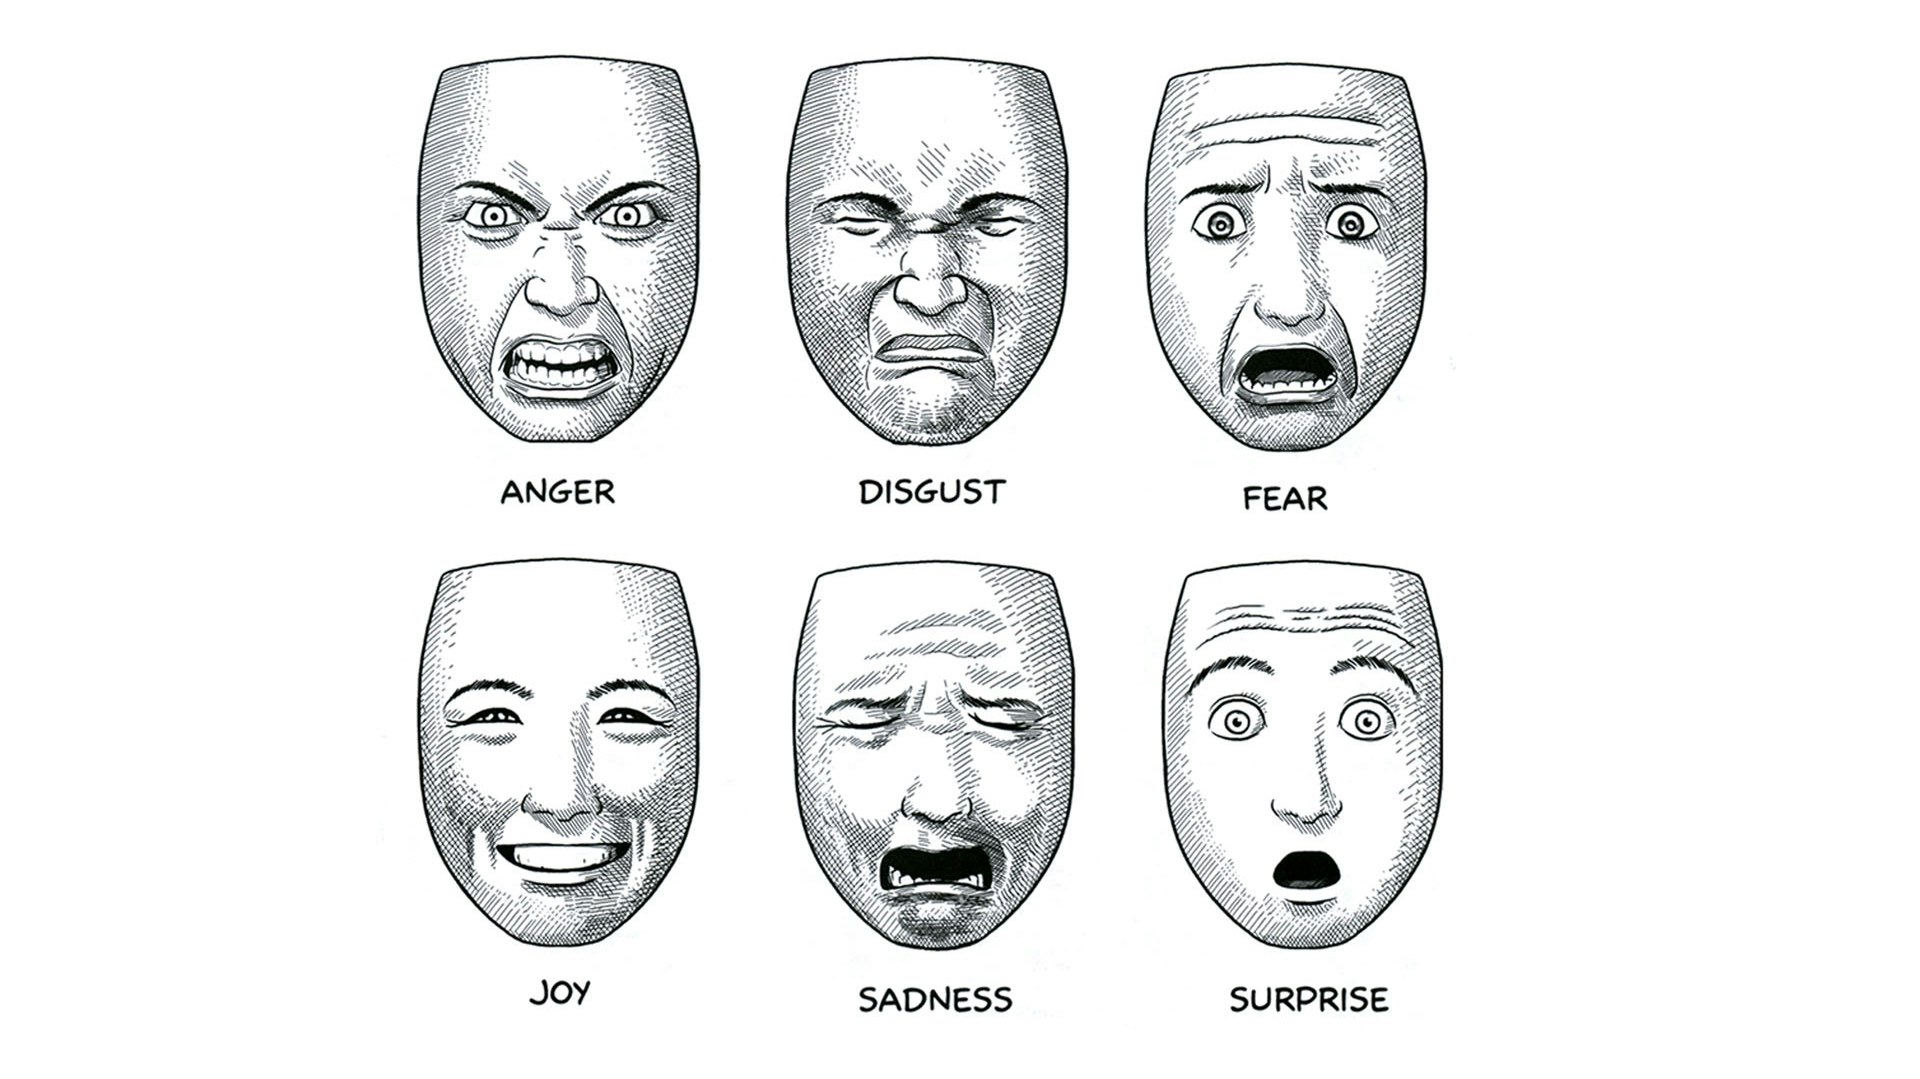 Illustration of facial expressions showing anger, disgust, fear, joy, sadness, and surprise.